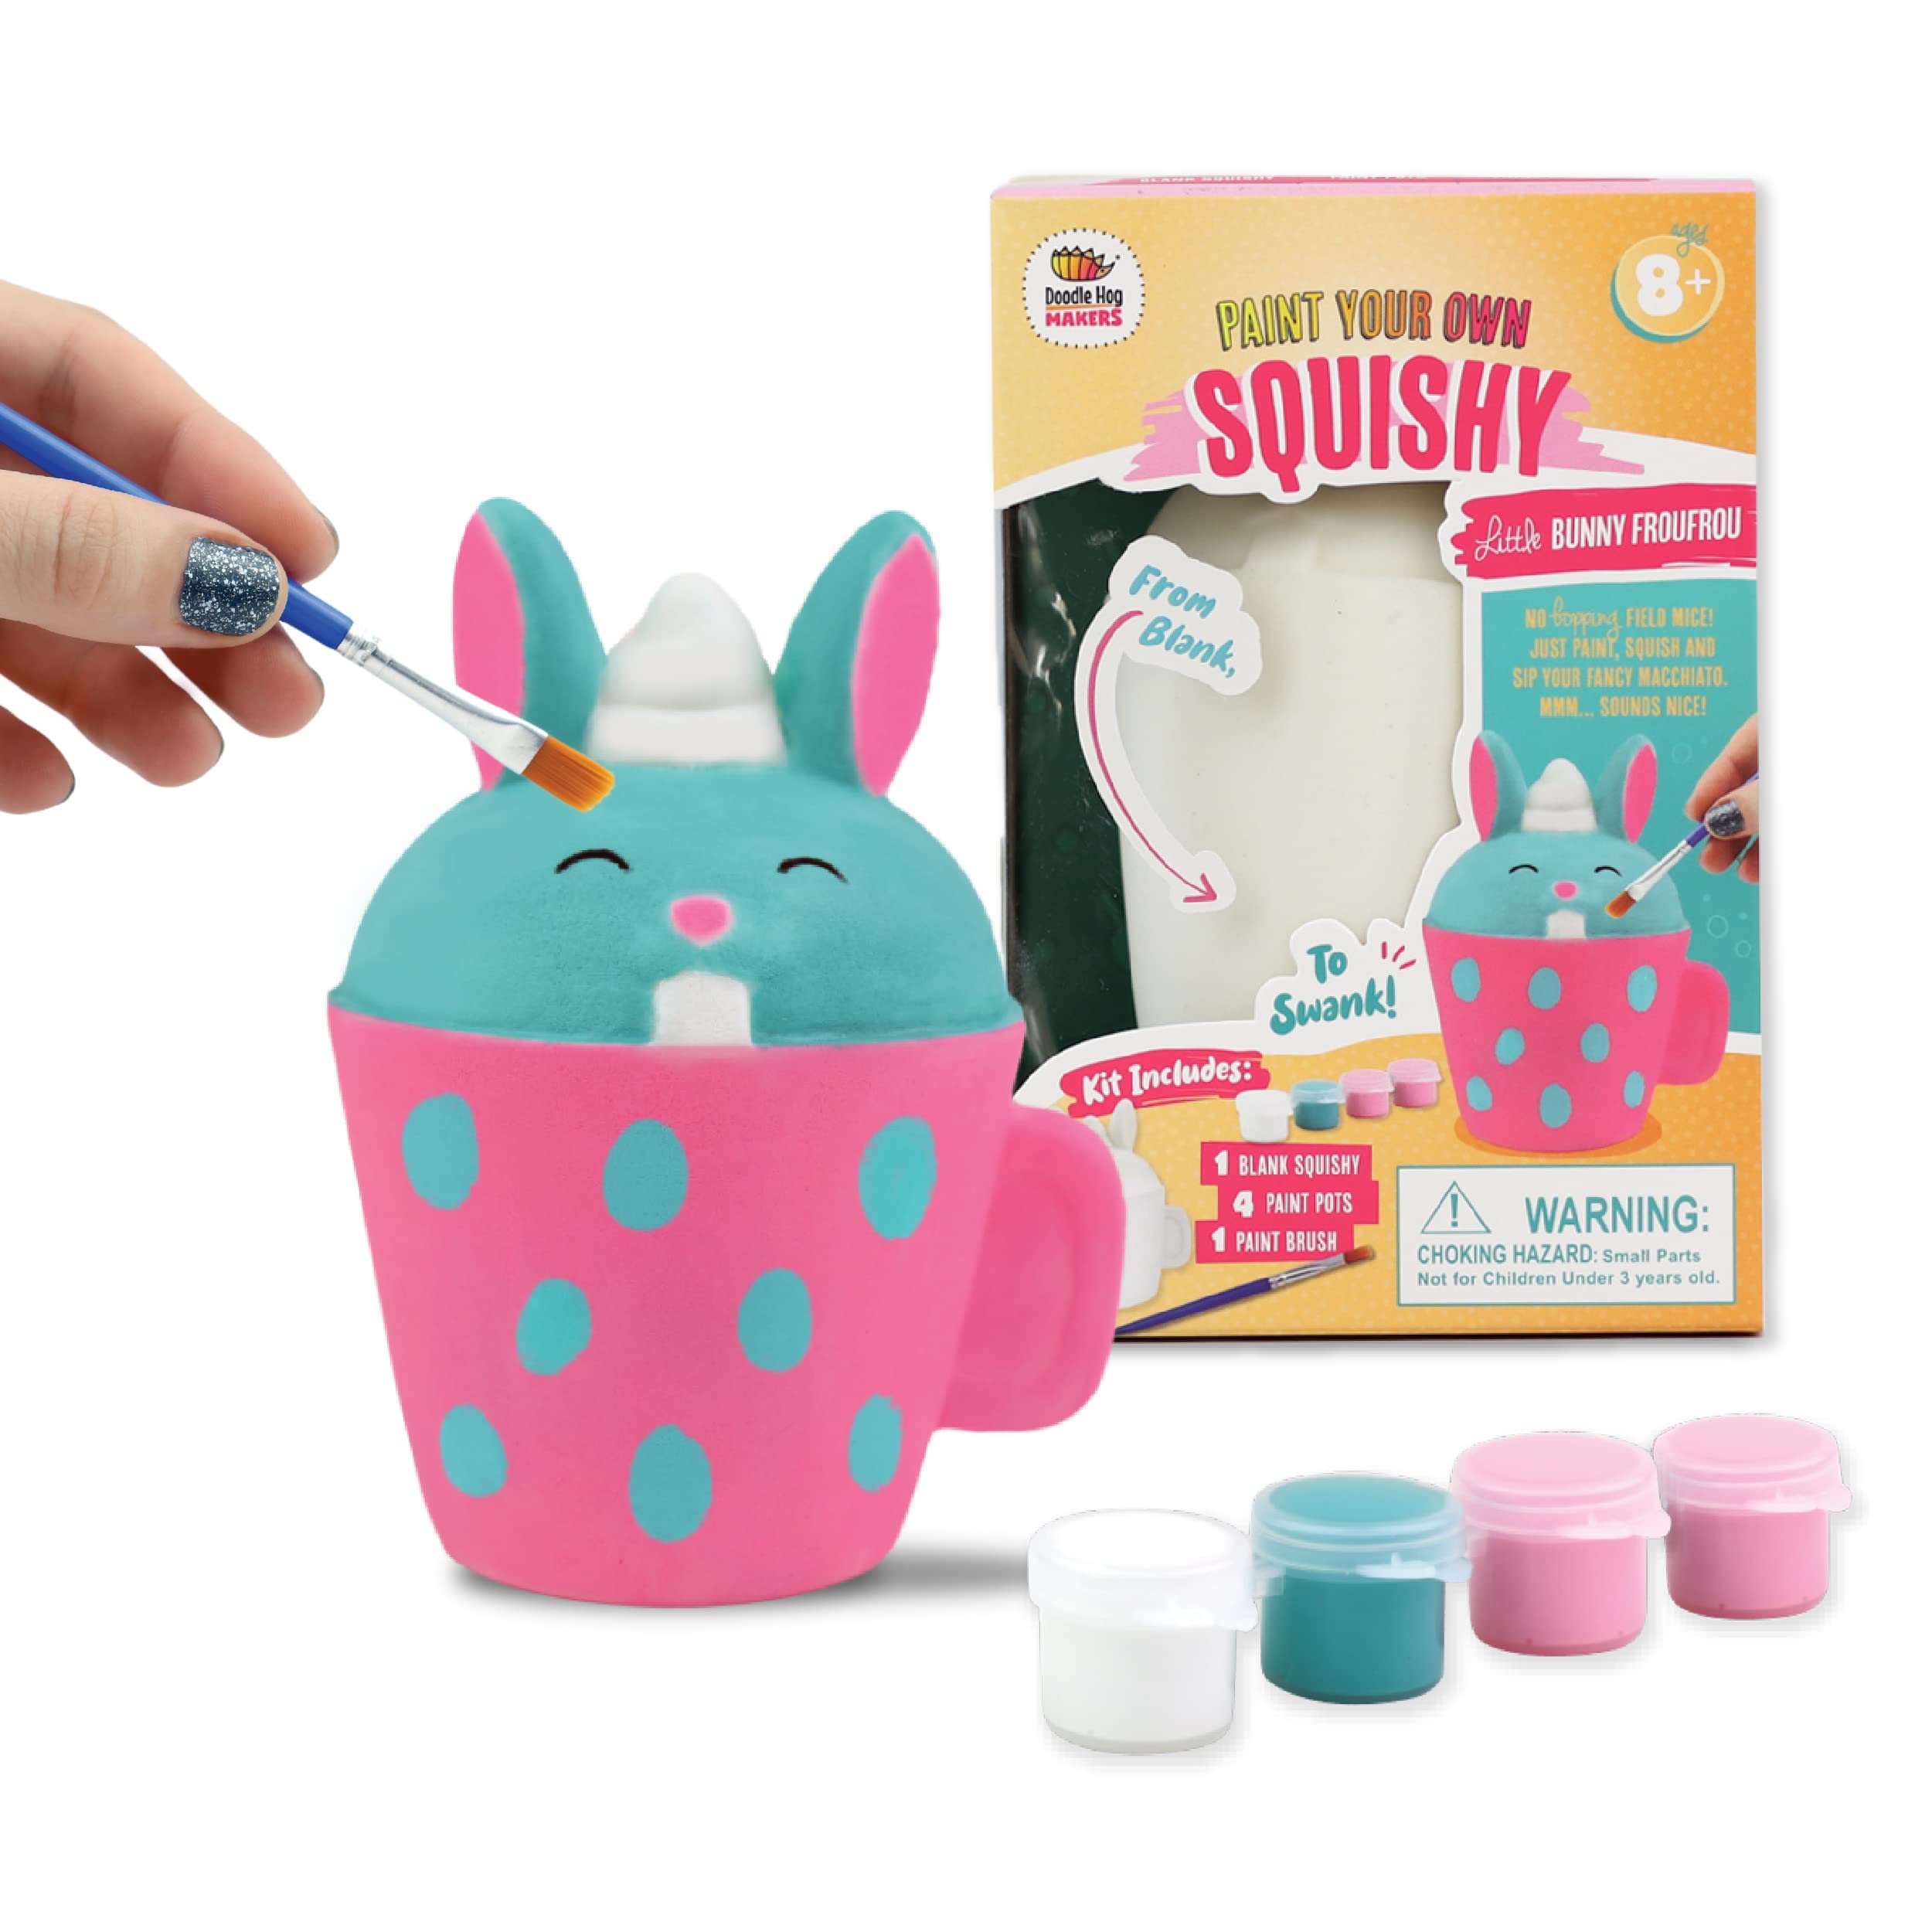 Doodle Hog Original DIY Paint Your Own Squishies Kit Squishy Painting Kit Slow Rise Squishes Paint Ideal Arts and Crafts, Gift and Anxiety